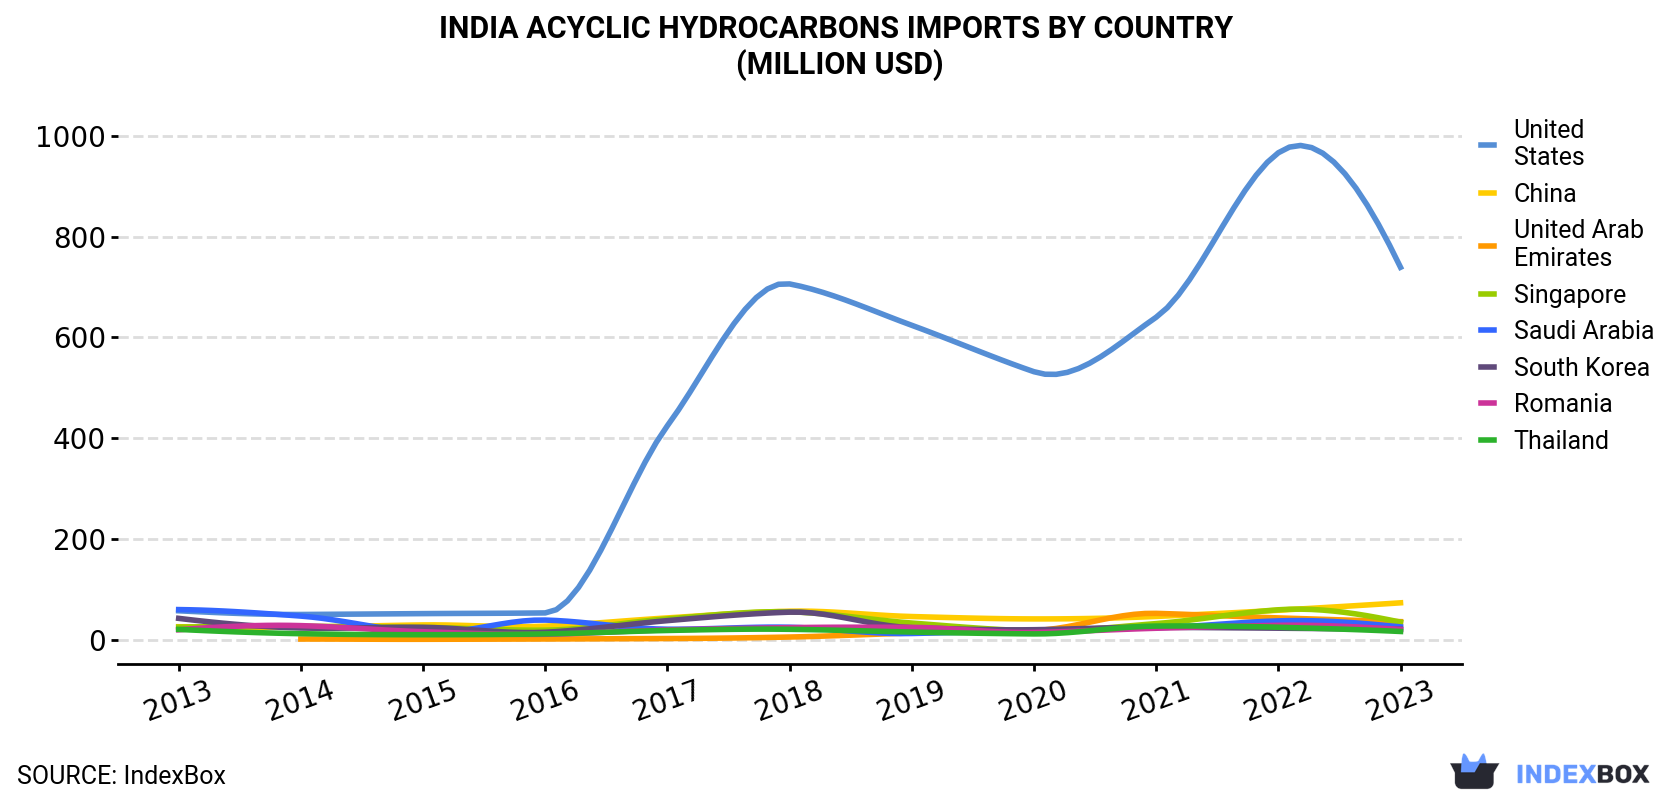 India Acyclic Hydrocarbons Imports By Country (Million USD)